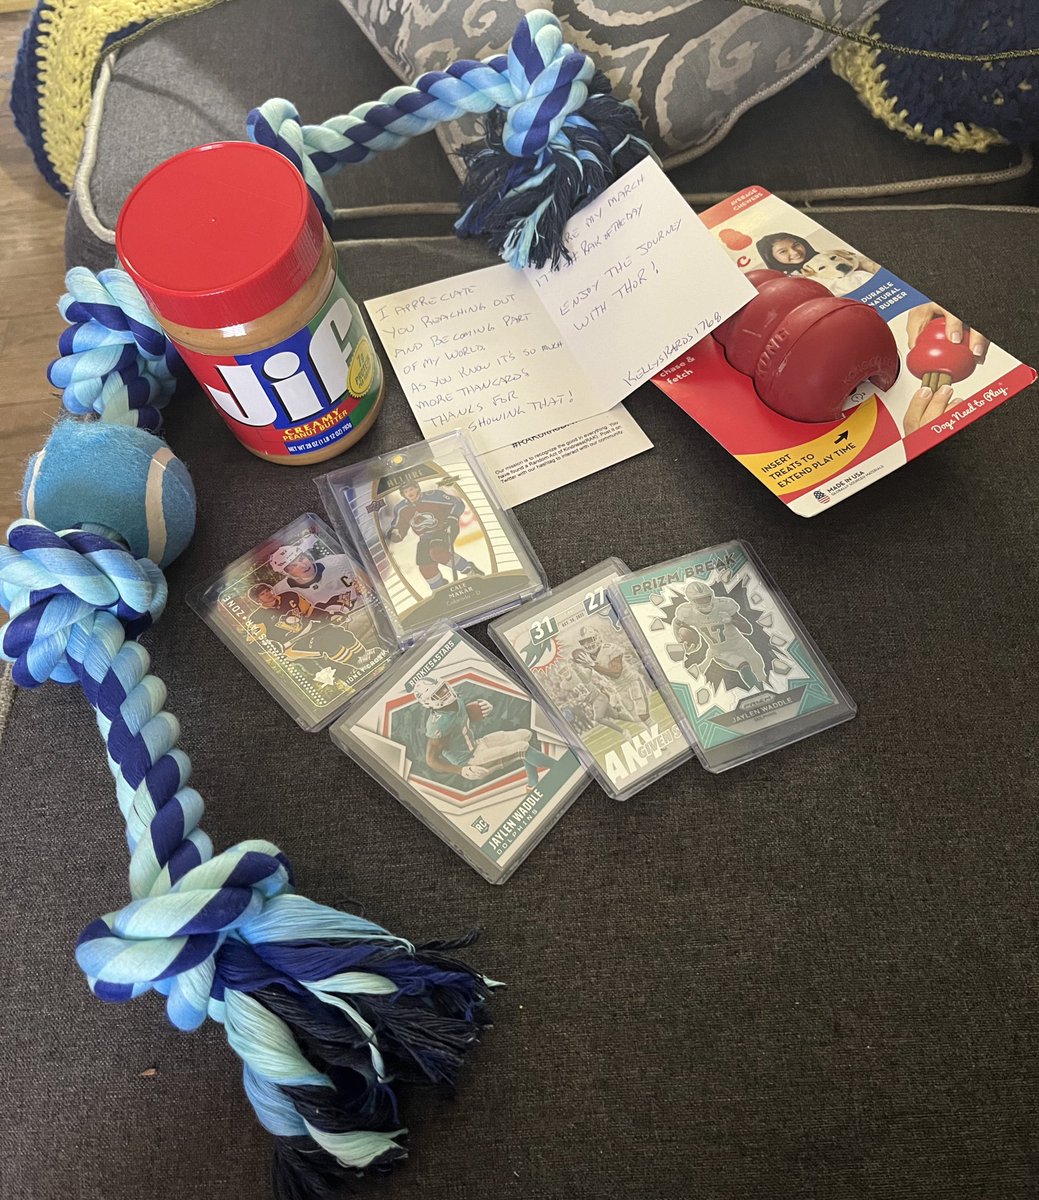 Thank you to @KellysKards1768 for the #RAKOFTHEDAY! 

I love the cards and author loved the rope ball toy. 

You are a hobby great.